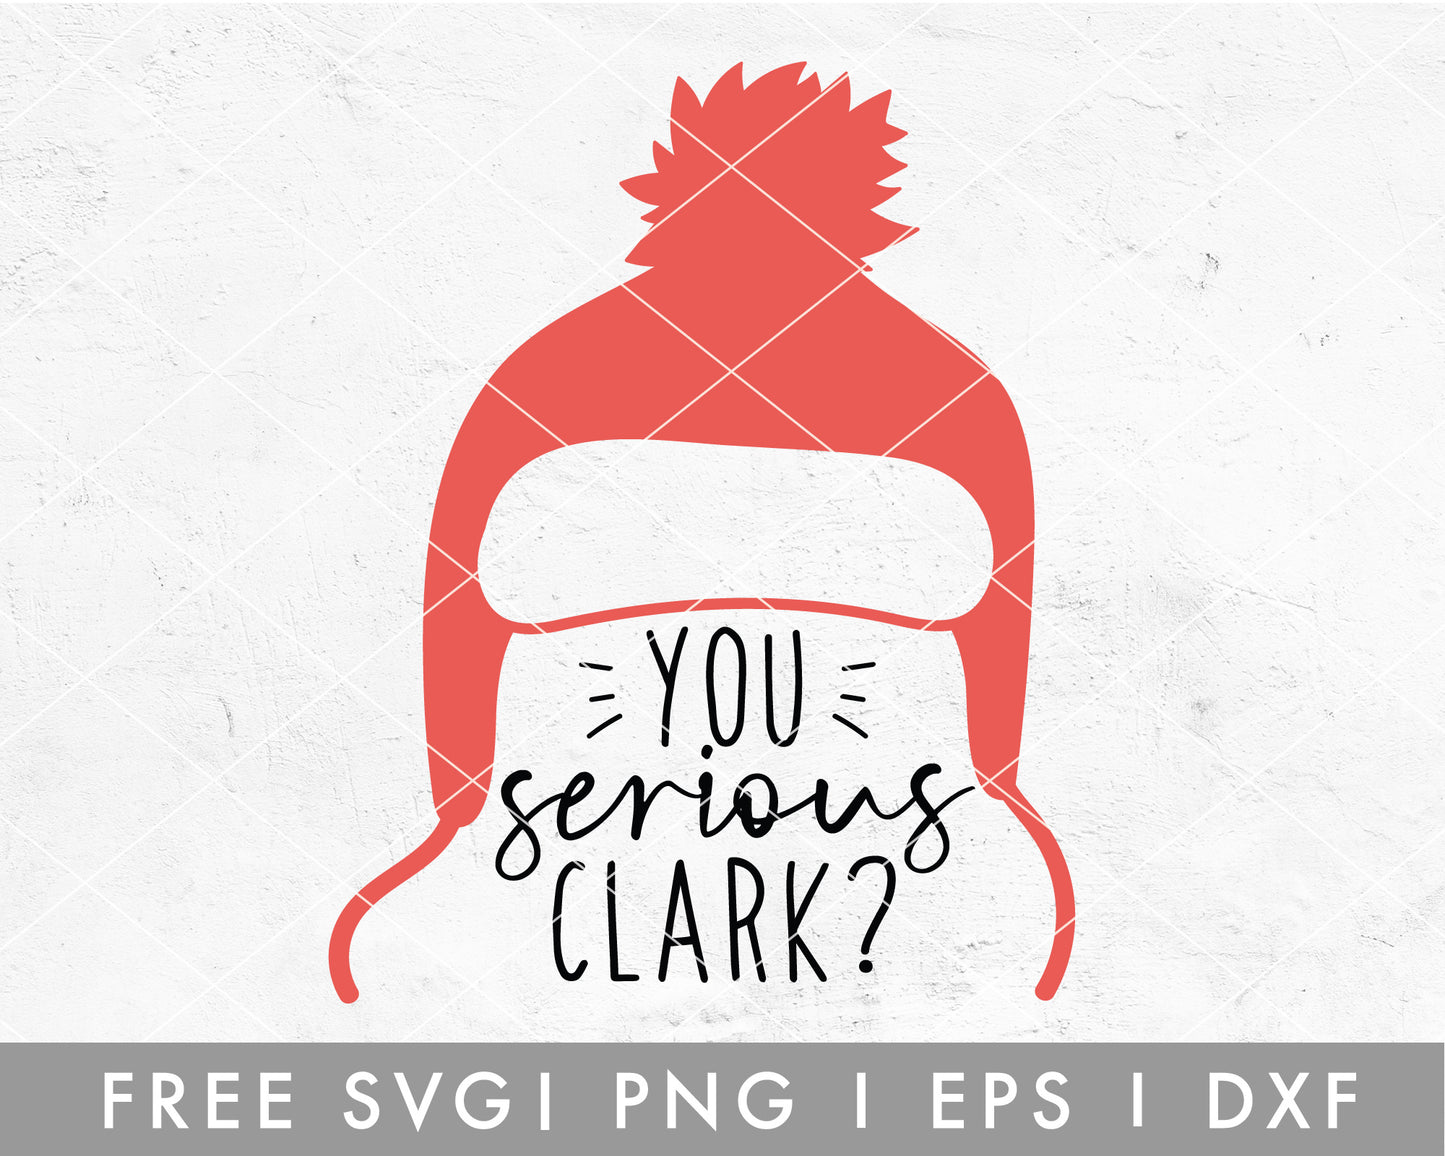 FREE You Serious Clark SVG